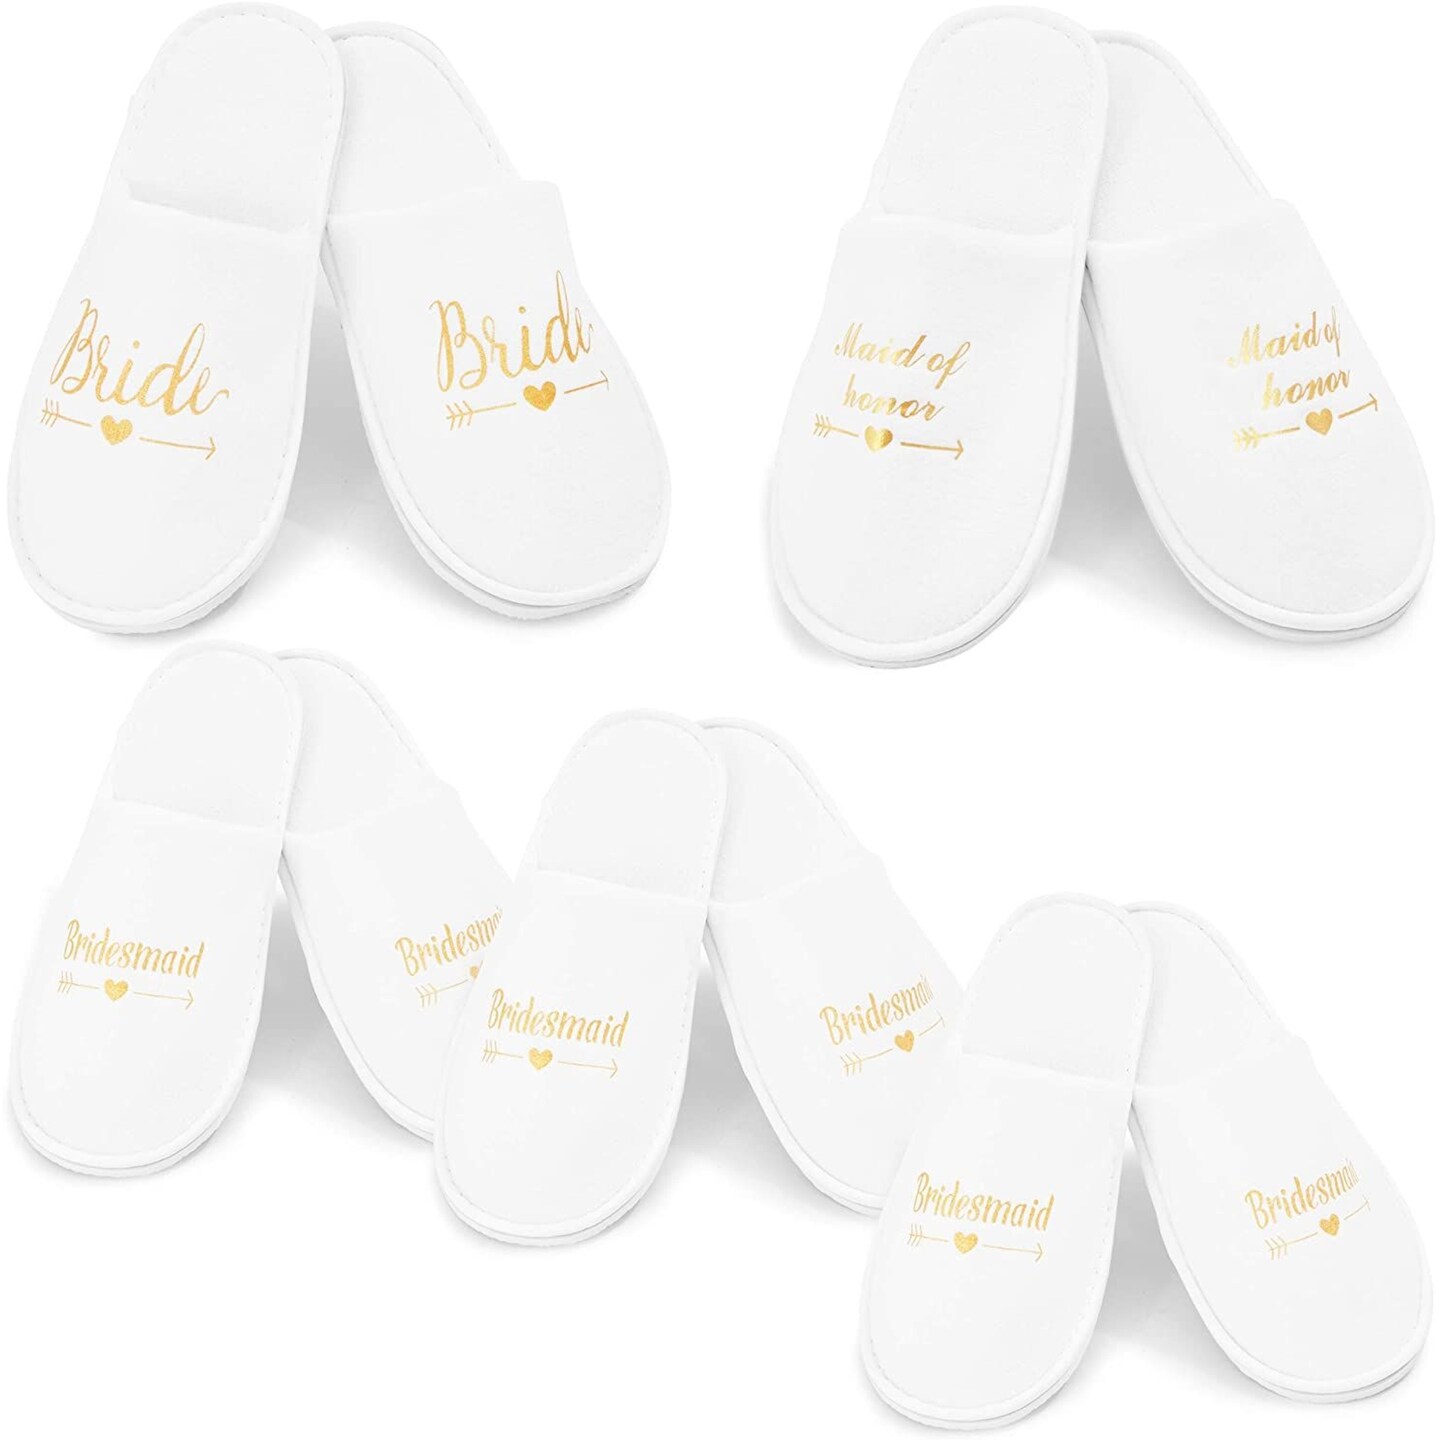 Set of 5 Bridesmaids Slippers - White Bridal Party Shoes for Maid of Honor, Wedding, Spa Party Favors (US Women&#x27;s 6-9.5)